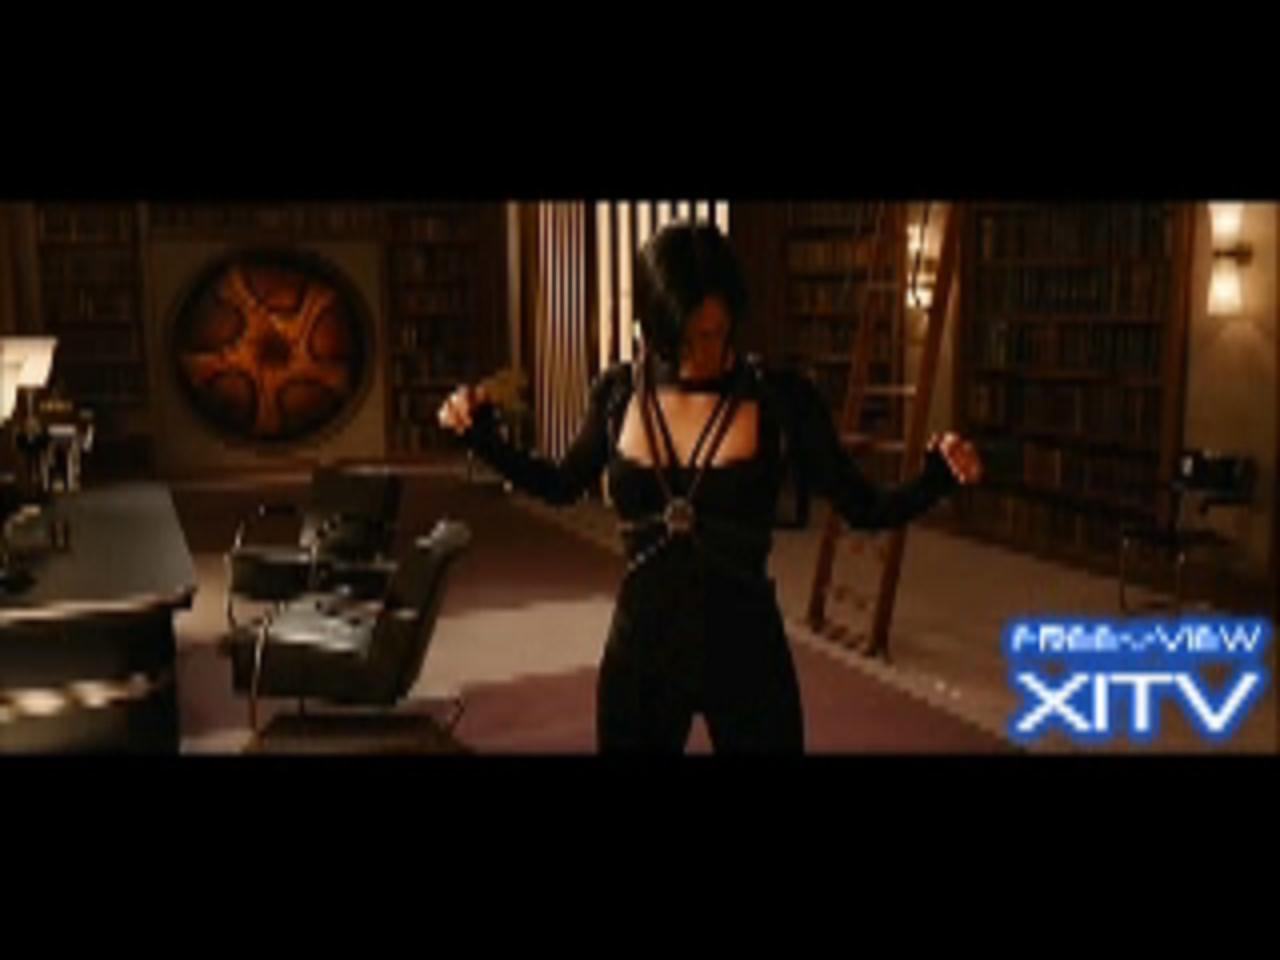 Watch Now! XITV FREE <> VIEW "AEON FLUX!" Starring Charlize Theron!